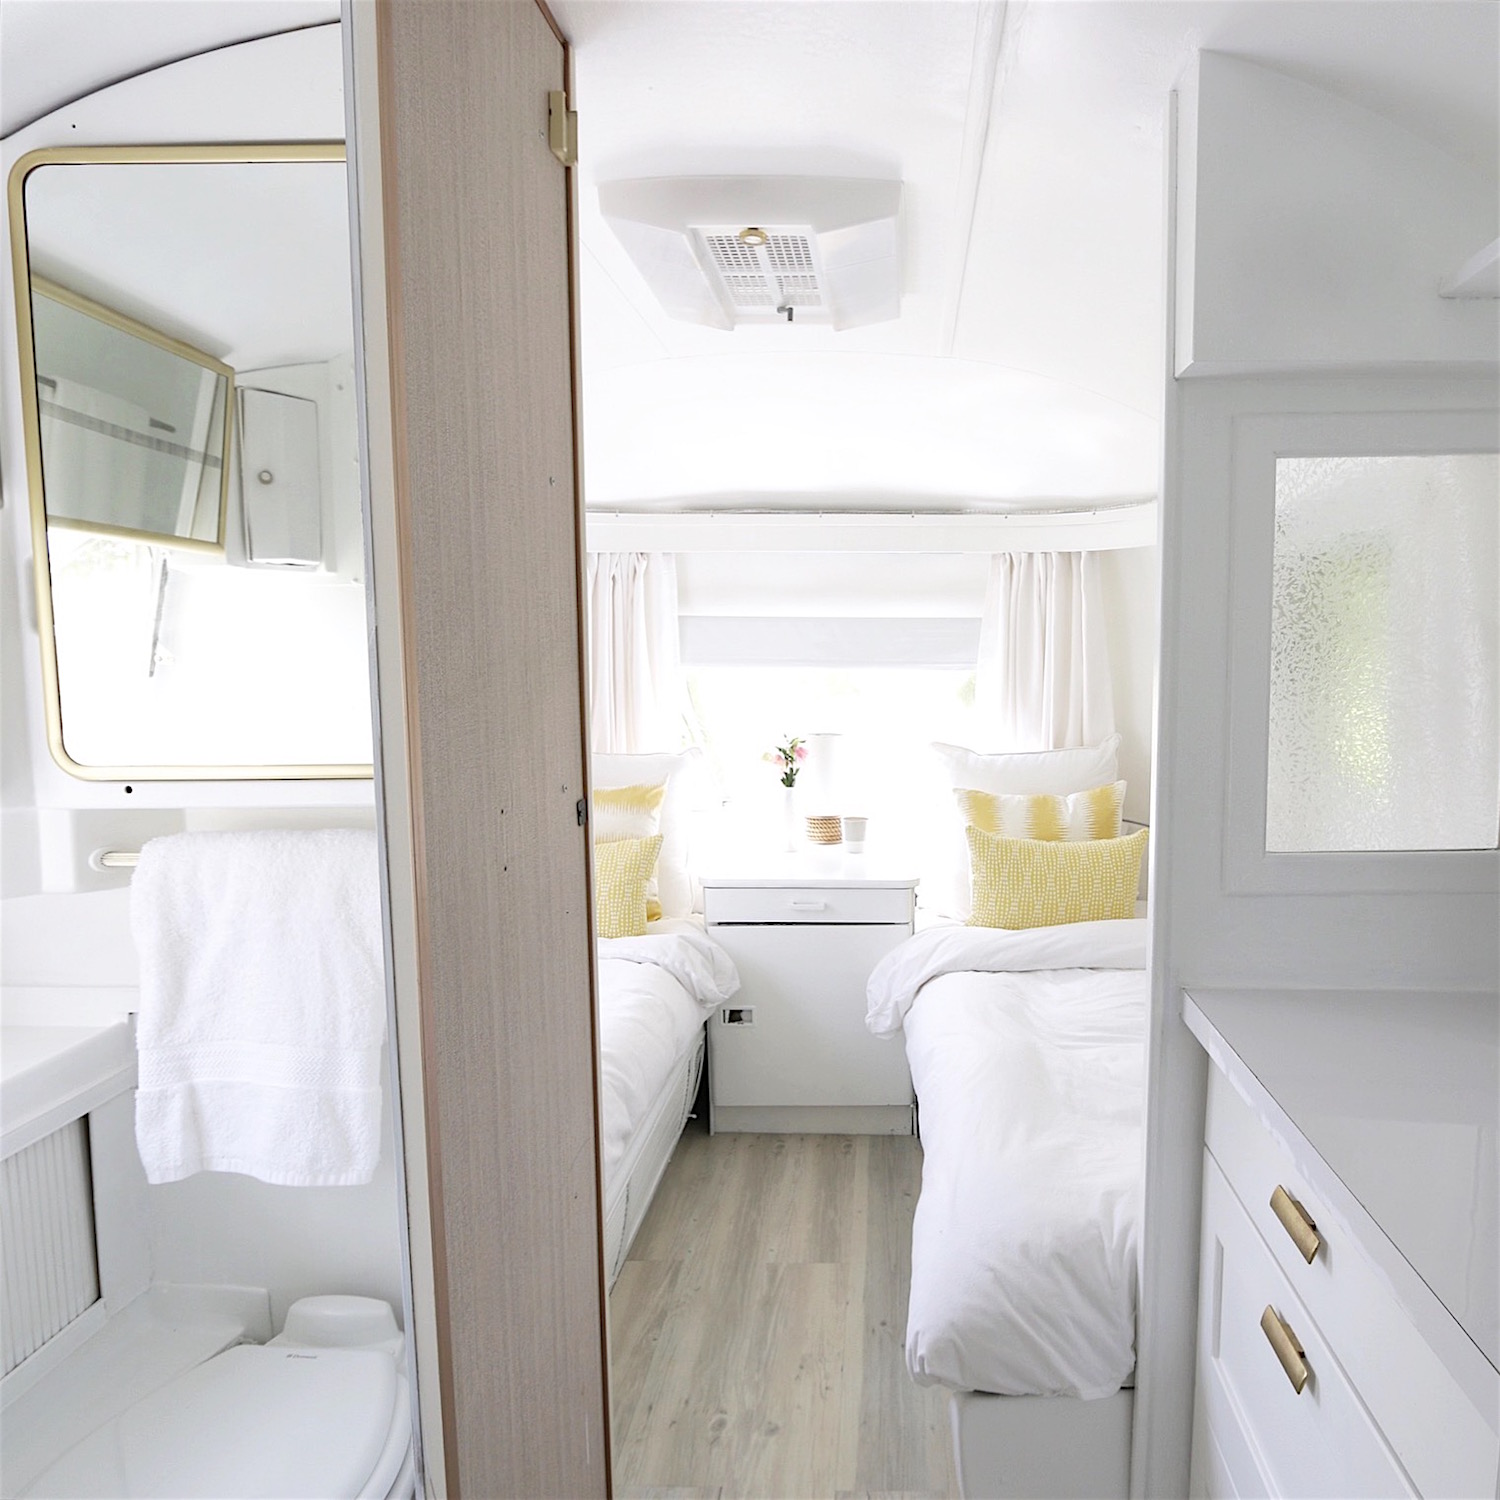 Love airstreams? Click on the photo to see the before and after transformation of a vintage 1976 31 ft airstream!